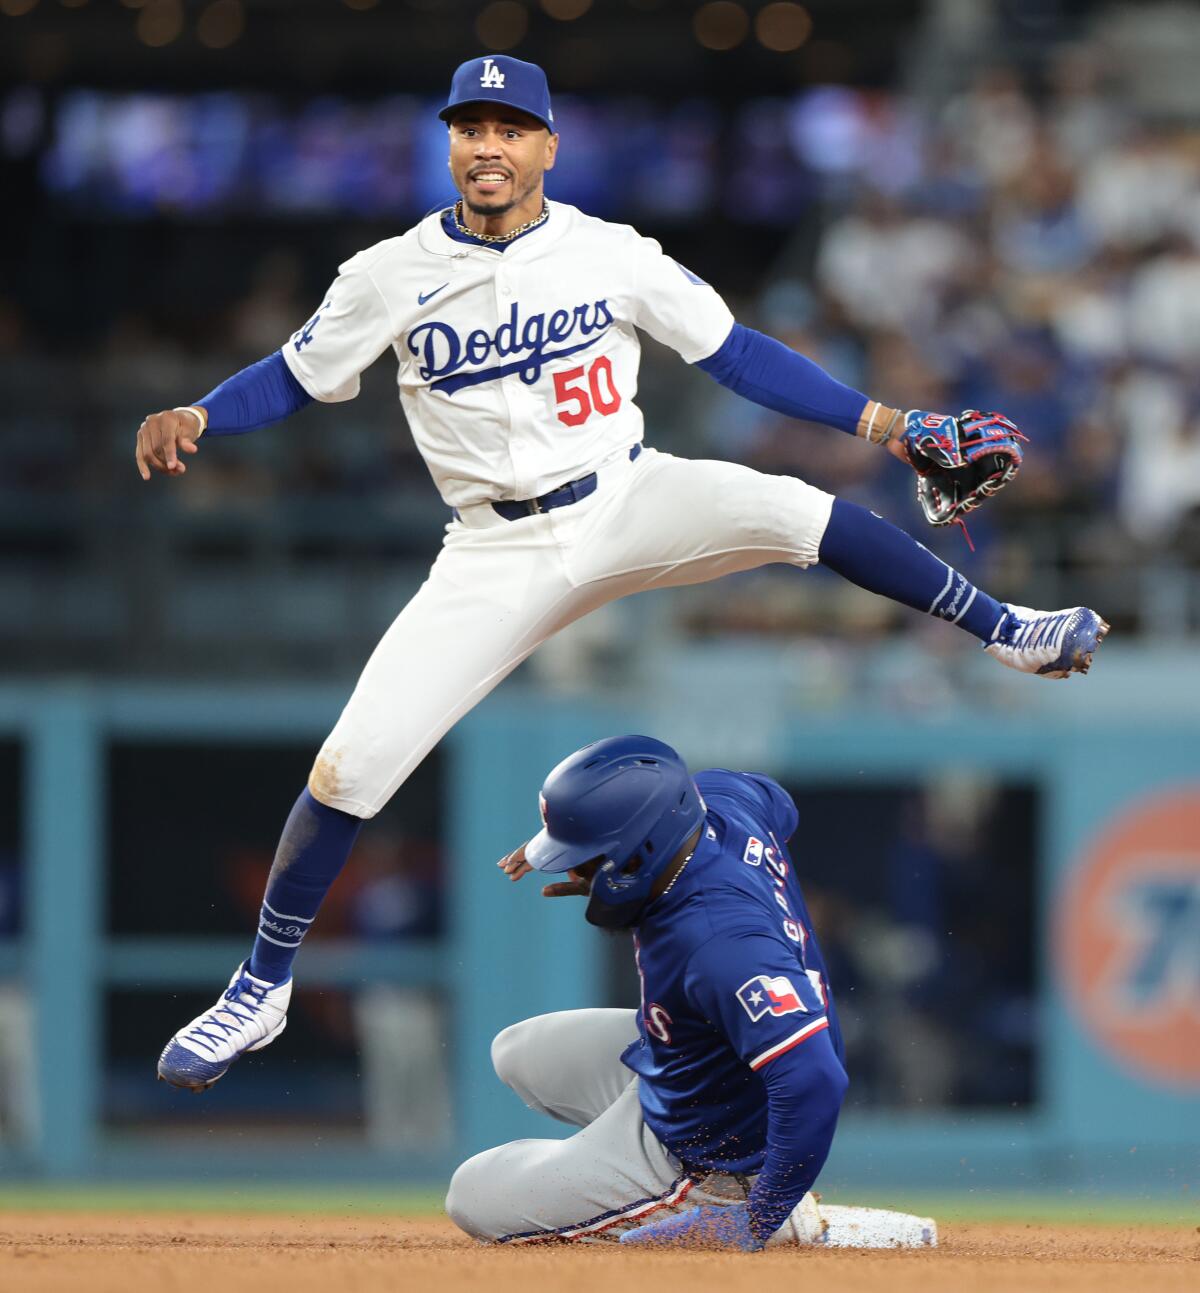 Dodgers shortstop Mookie Betts leaps over Rangers baserunner Adolis Garcia to complete a double play.